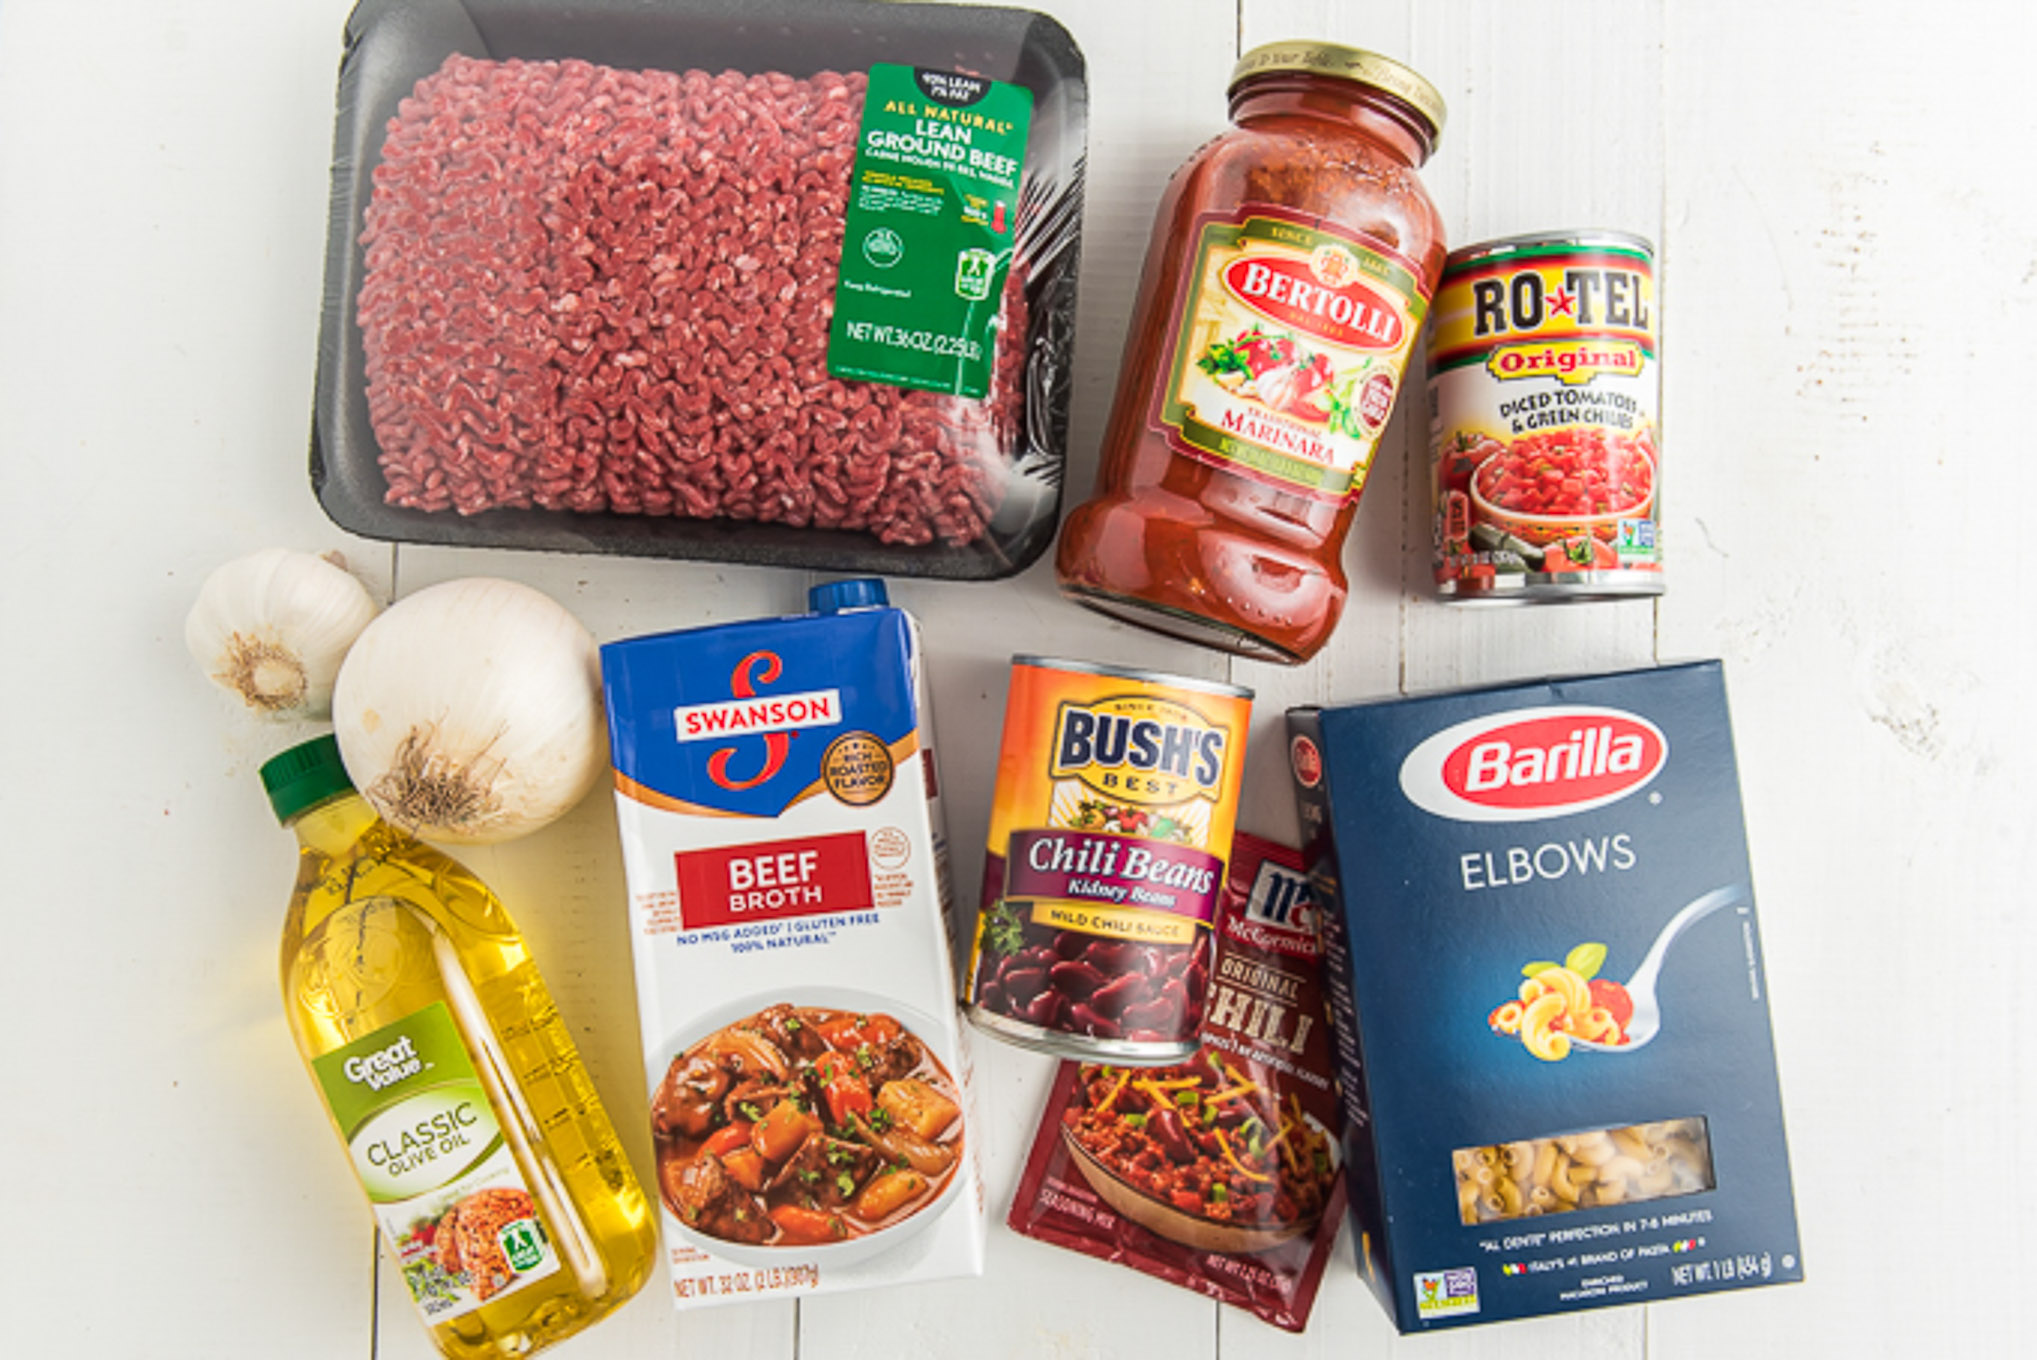 Ingredients to make this chili mac recipe on the table.